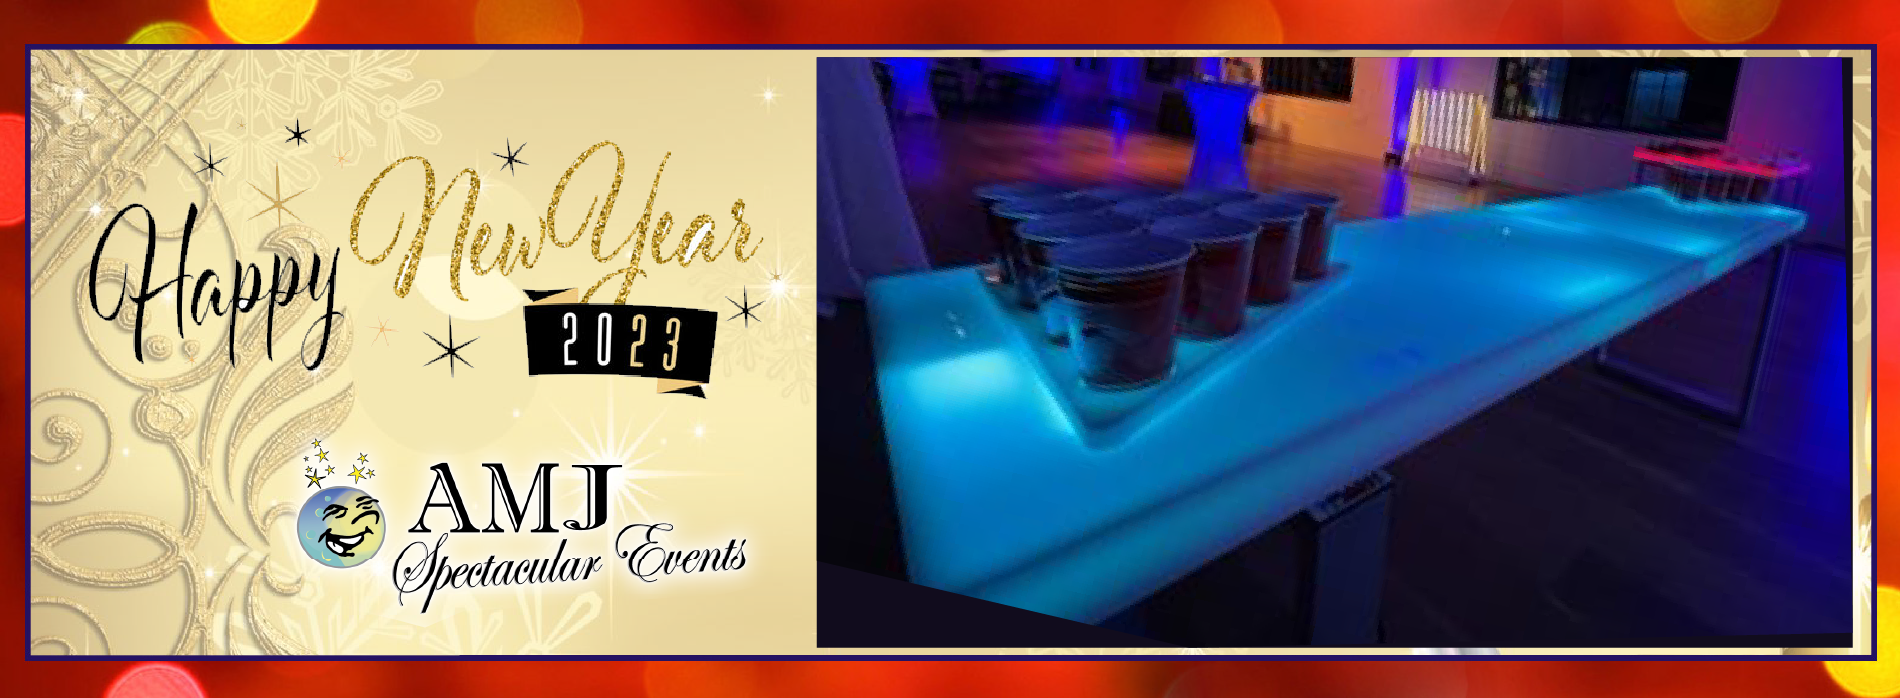 AMJ Spectacular Events presents Happy New Years Parties 2023 Themed Rentals